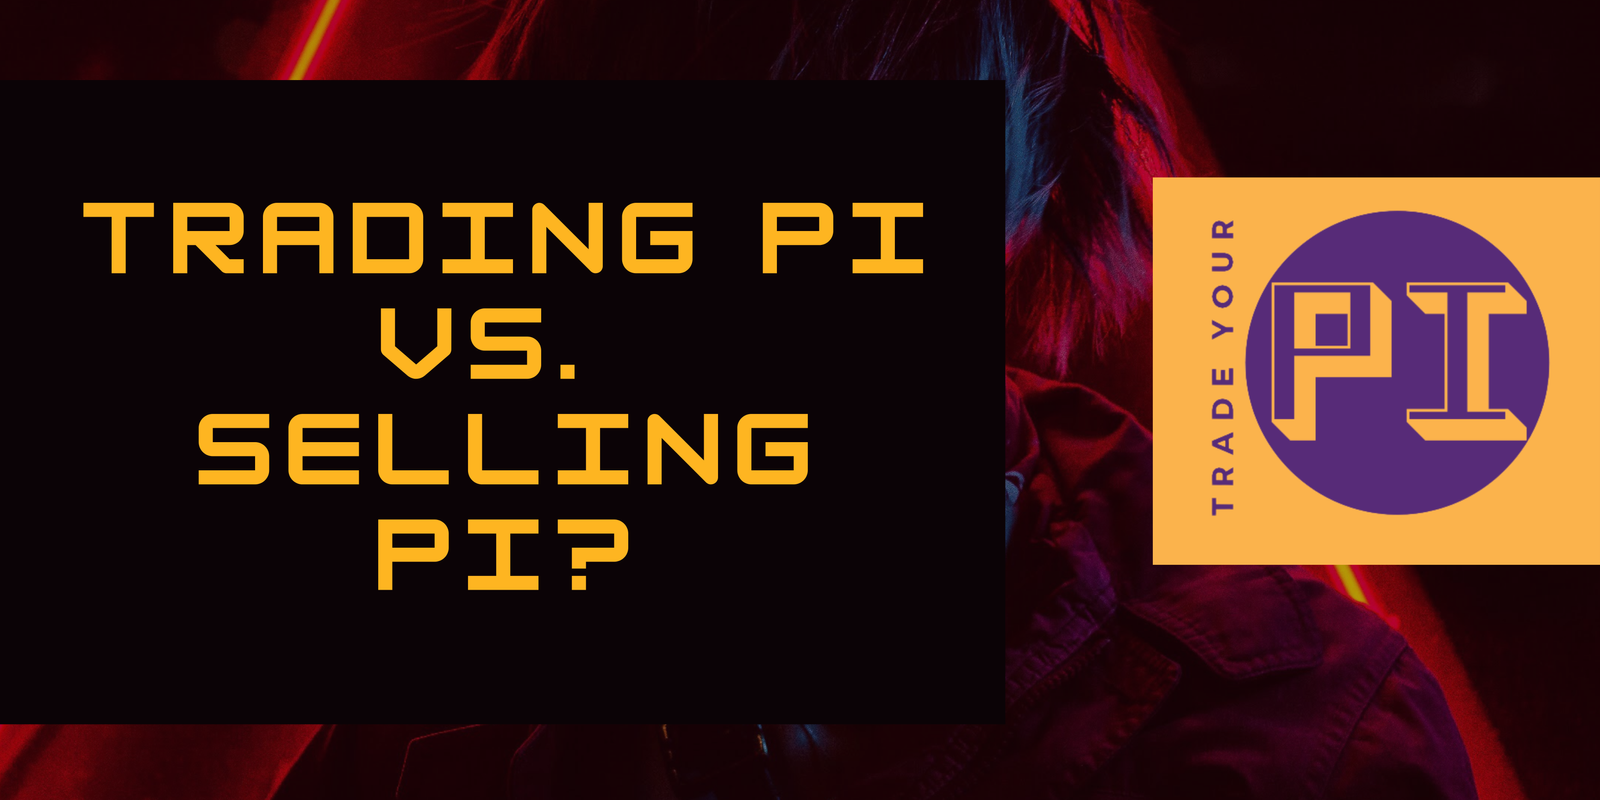 What’s the Purpose of Pi Cryptocurrency: Trading for Goods and Services vs. Selling Pi?